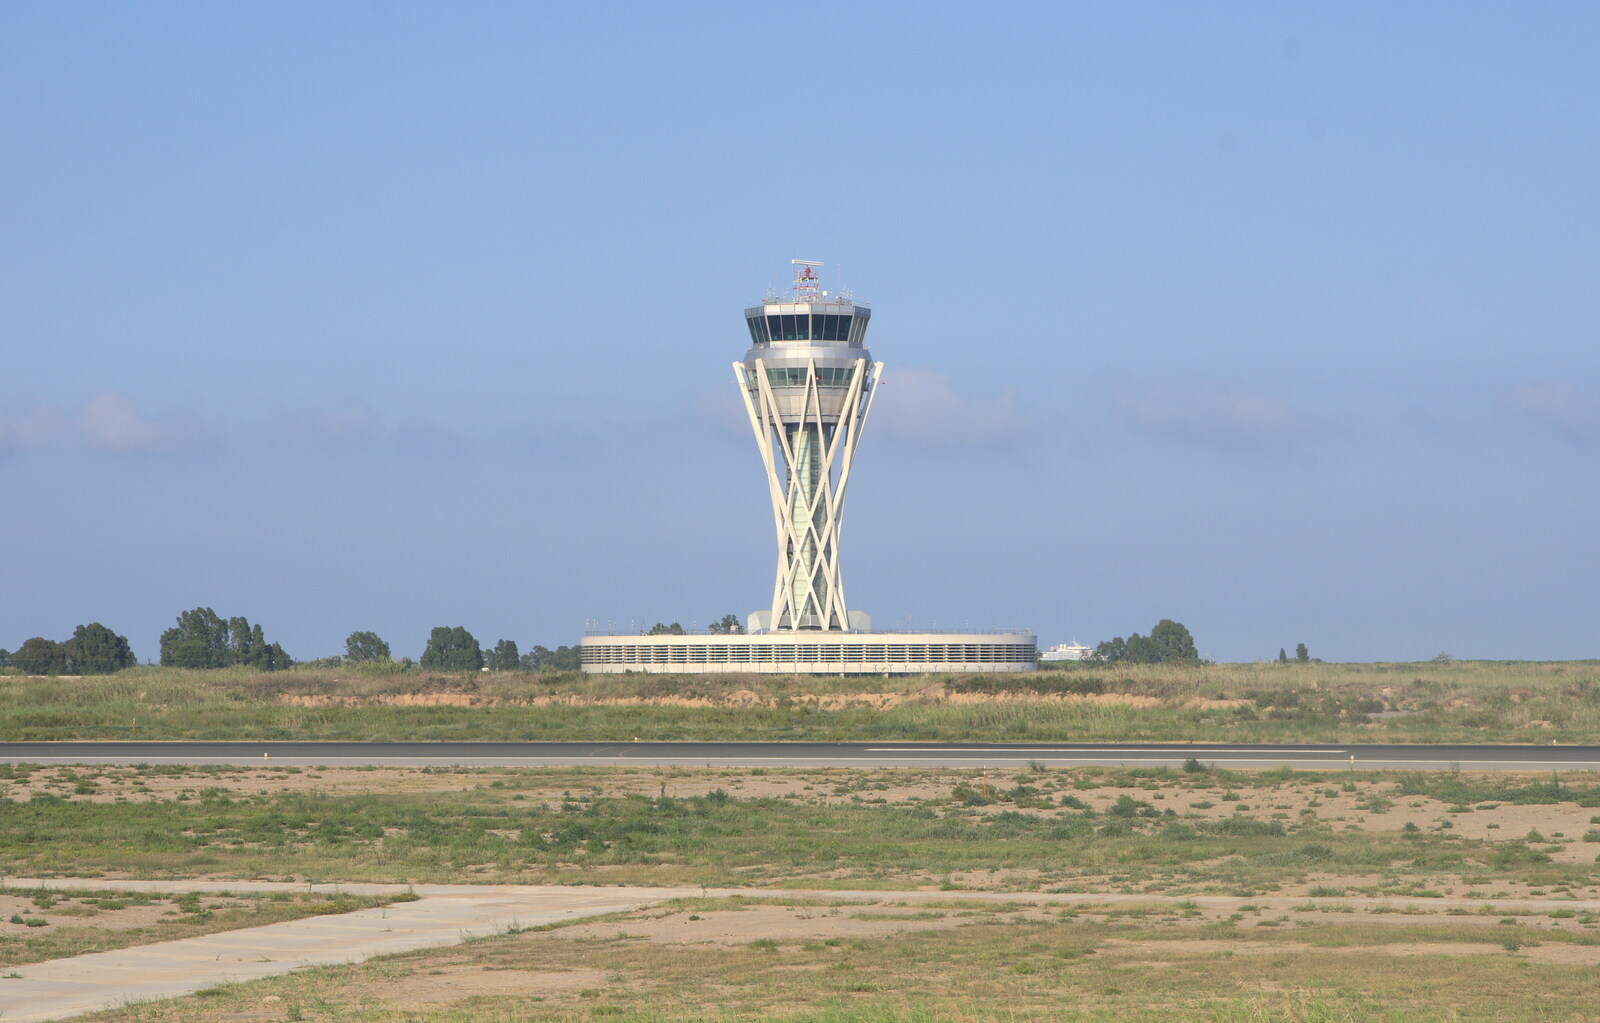 Cool Olympic-torch control tower at Barcelona  from The Open Education Challenge, Barcelona, Catalonia - 13th July 2014